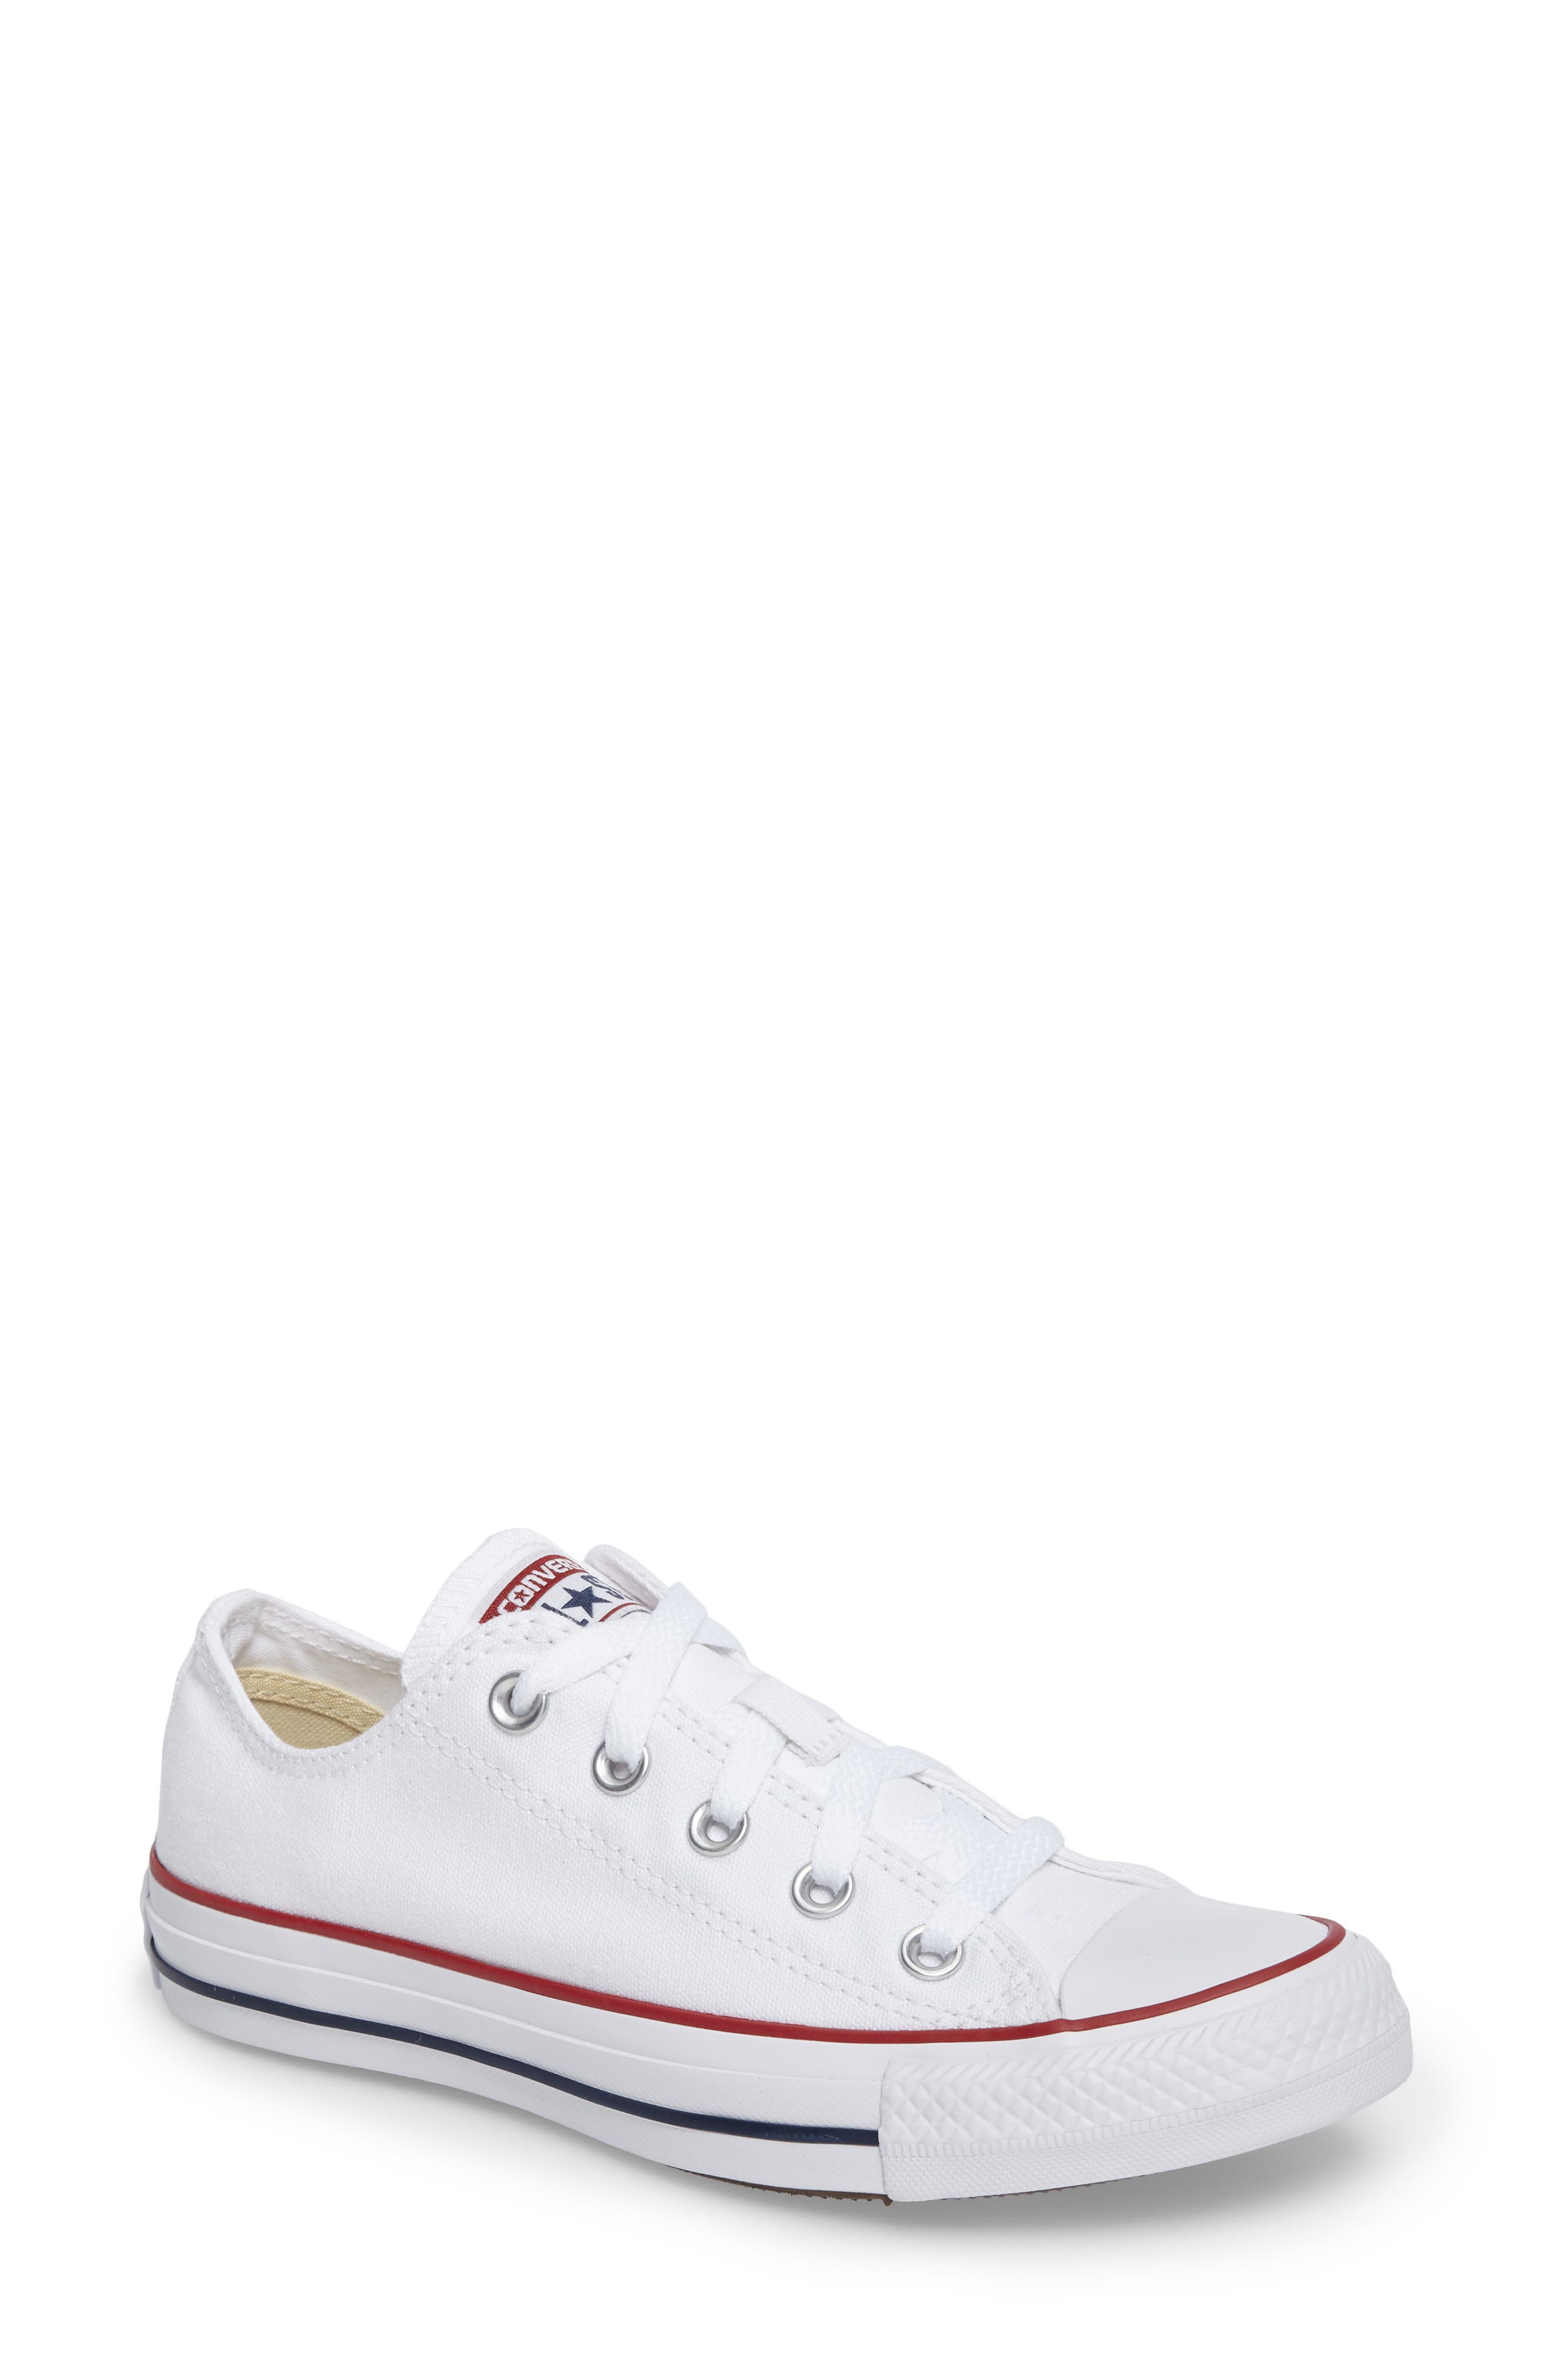 girls white converse sneakers